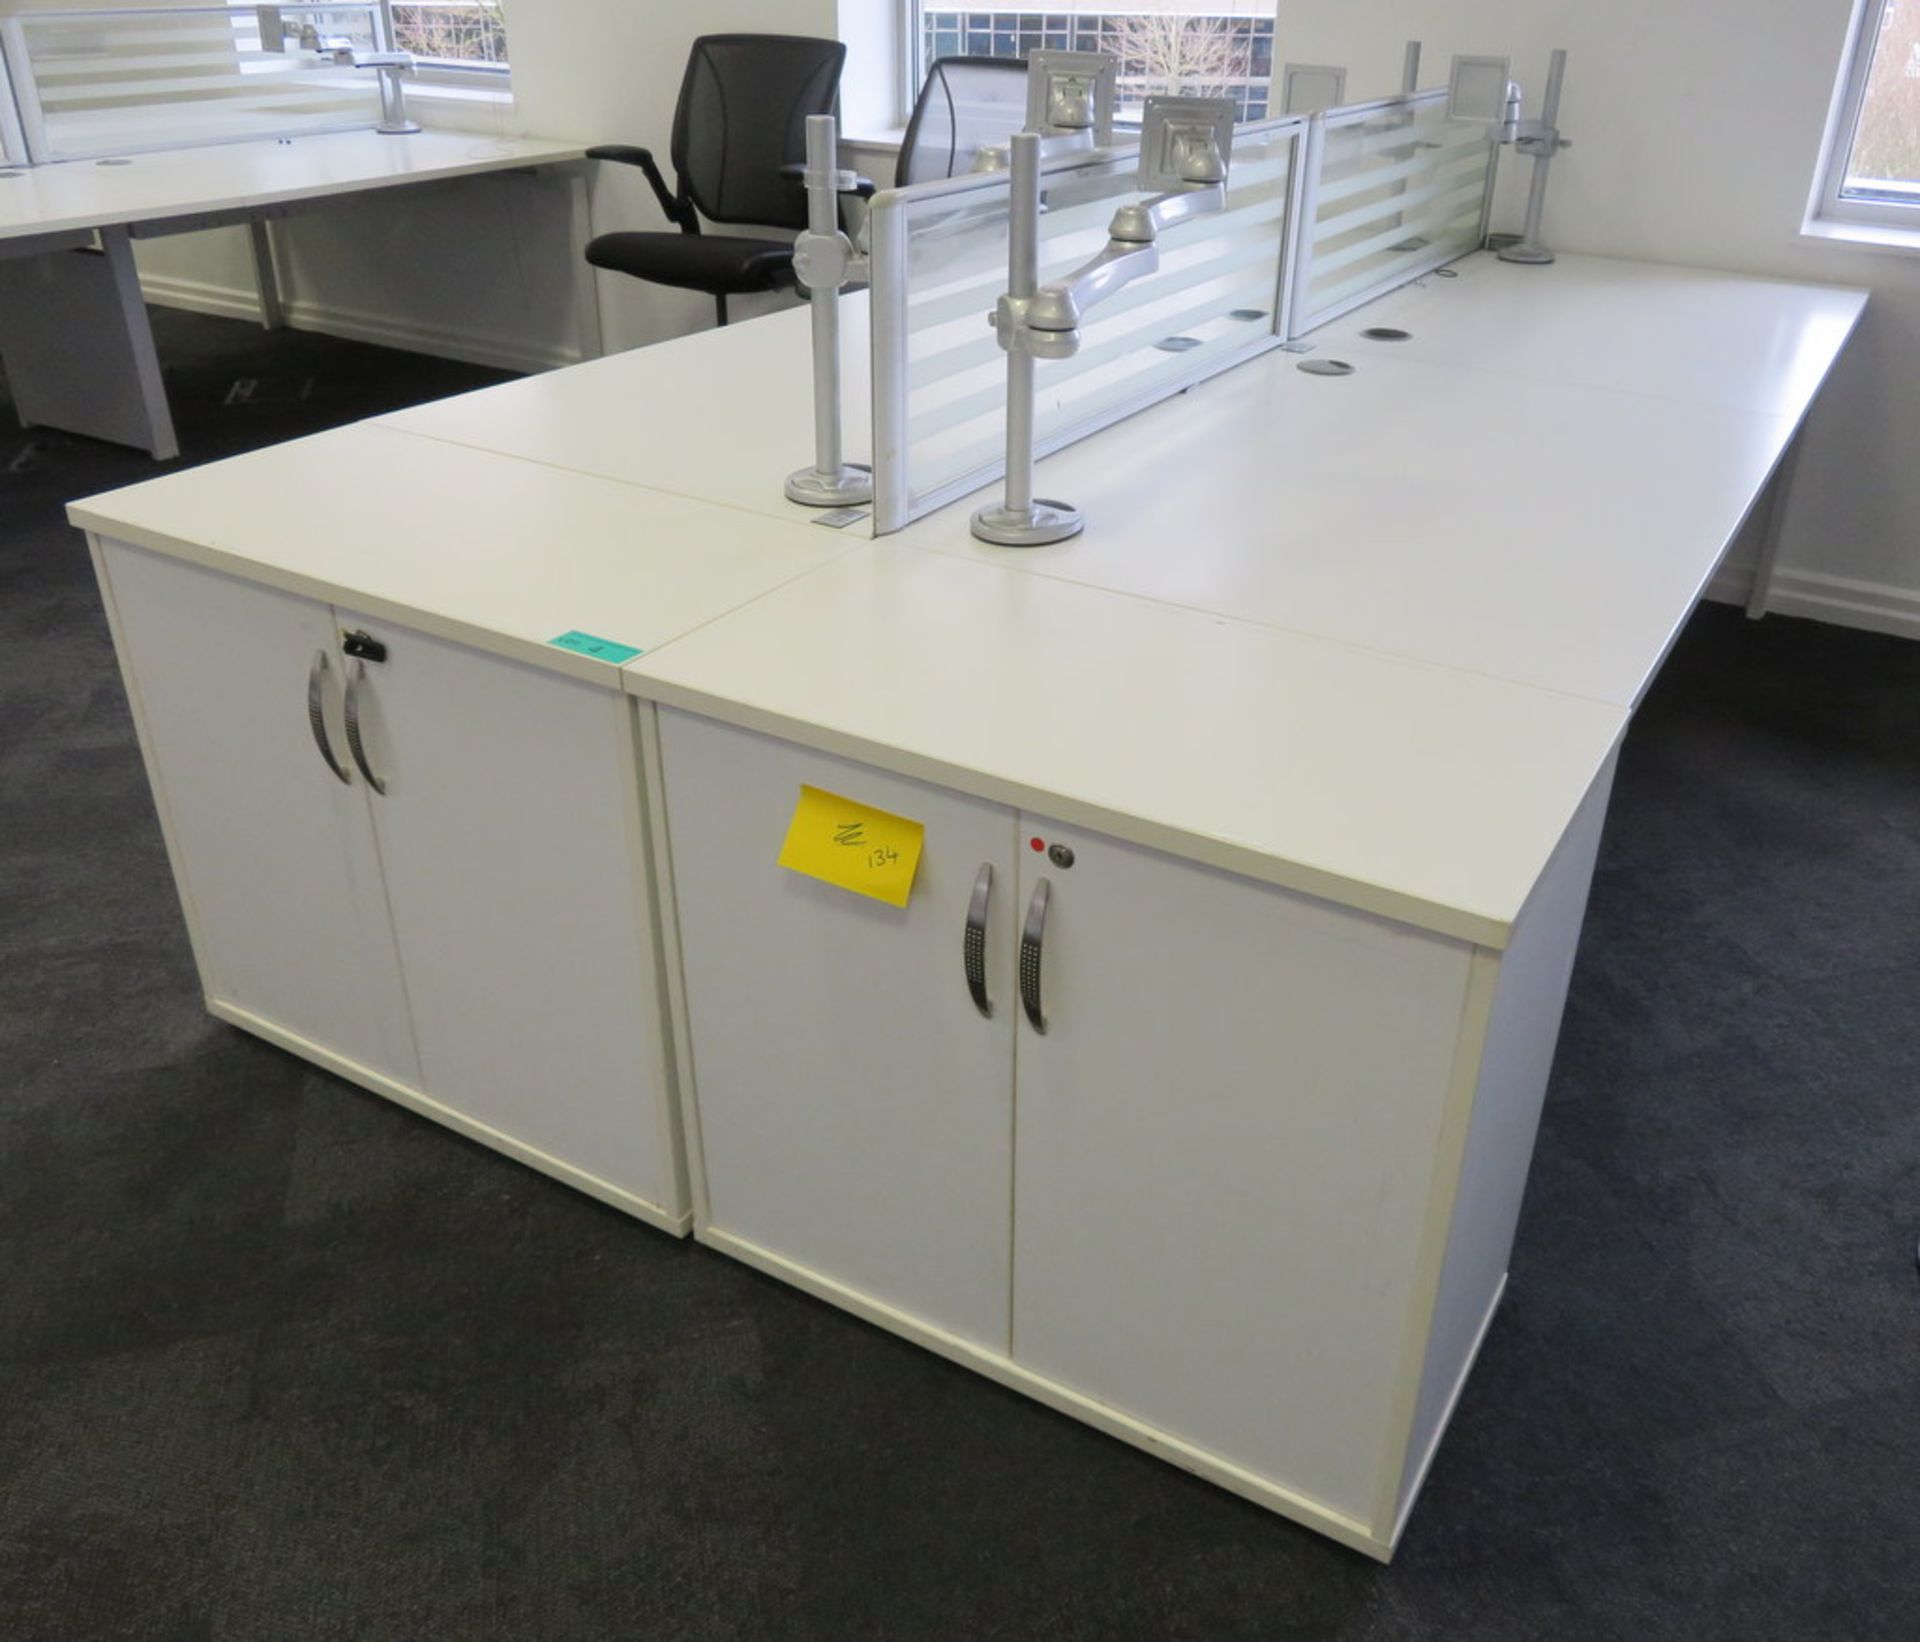 4 Person Desk Arrangement With Dividers, Monitor Arms & Storage Cupboards.